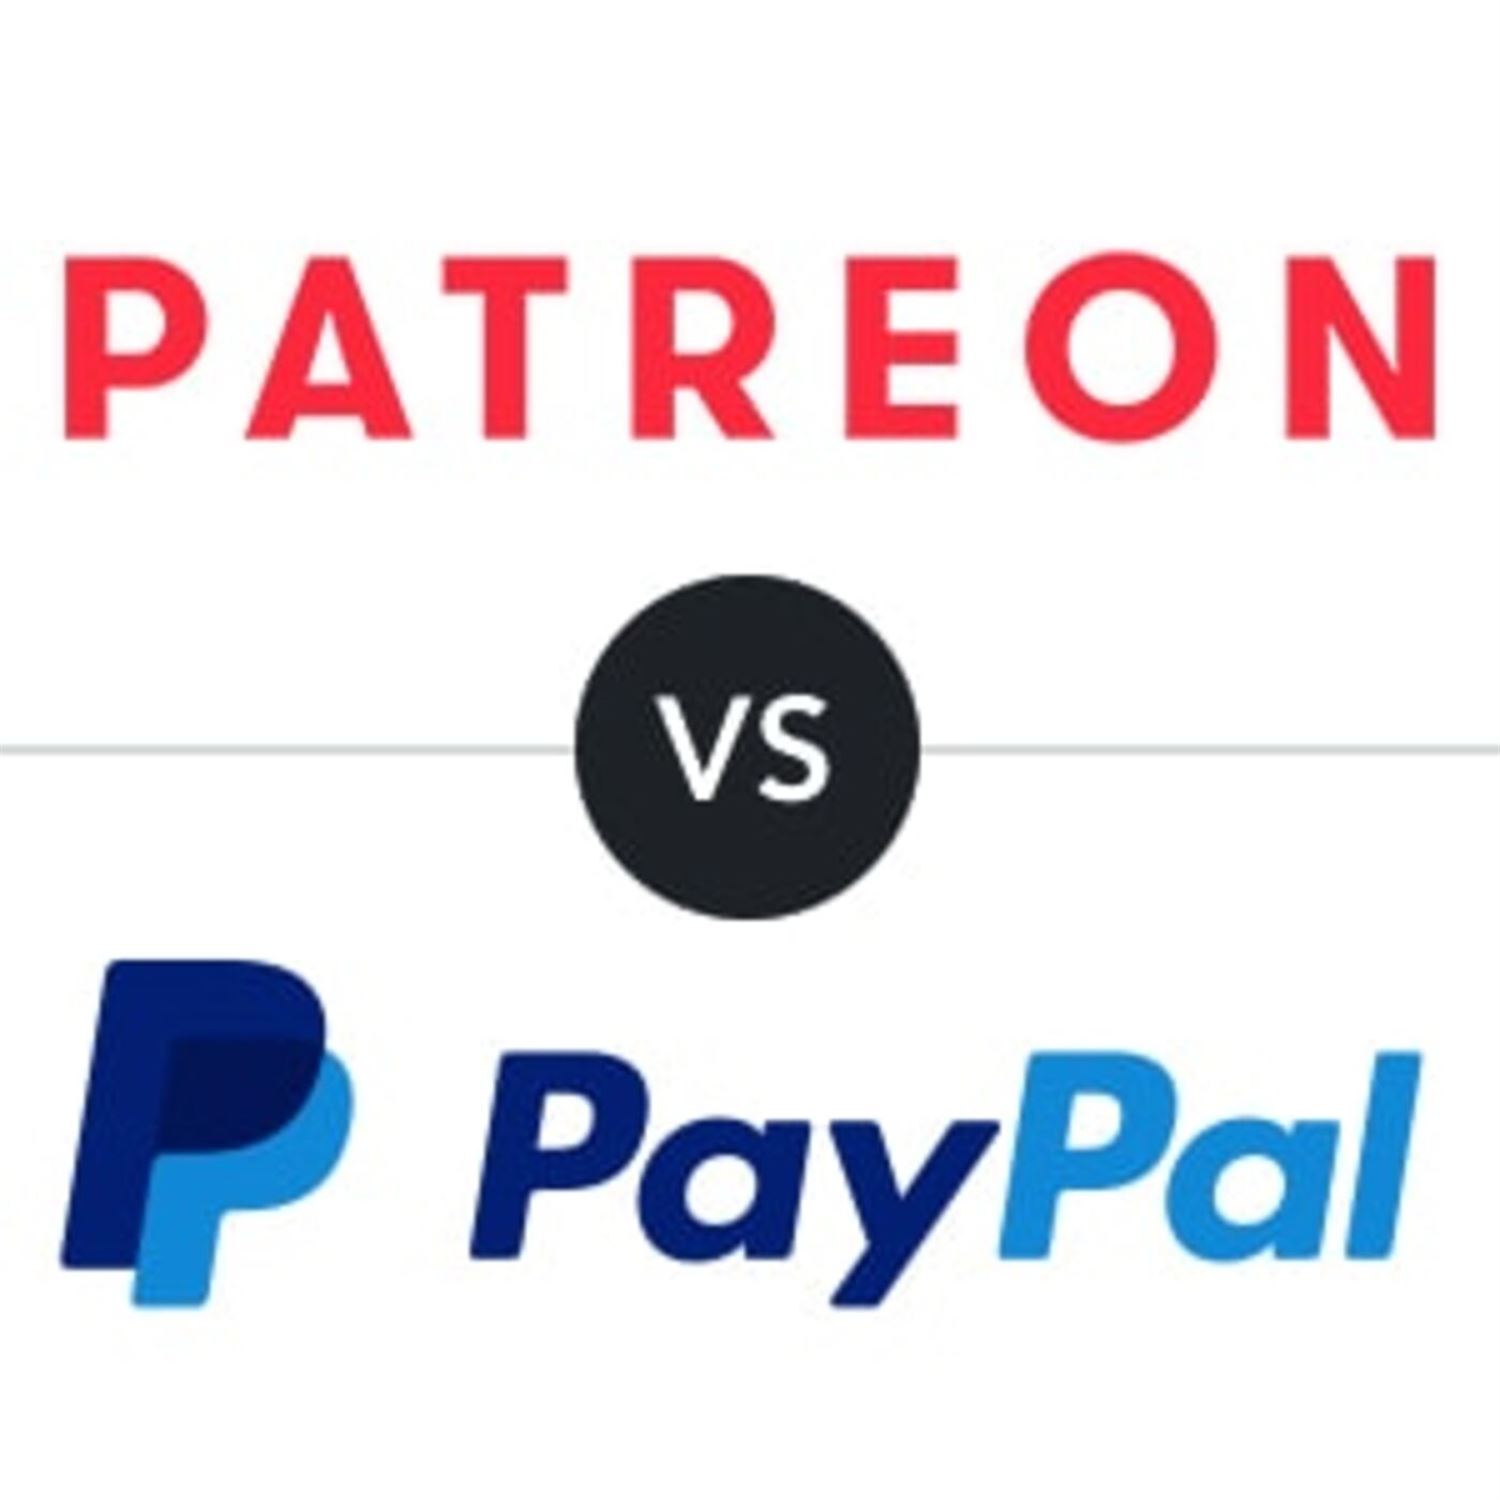 Patreon/Paypal, fuck that!